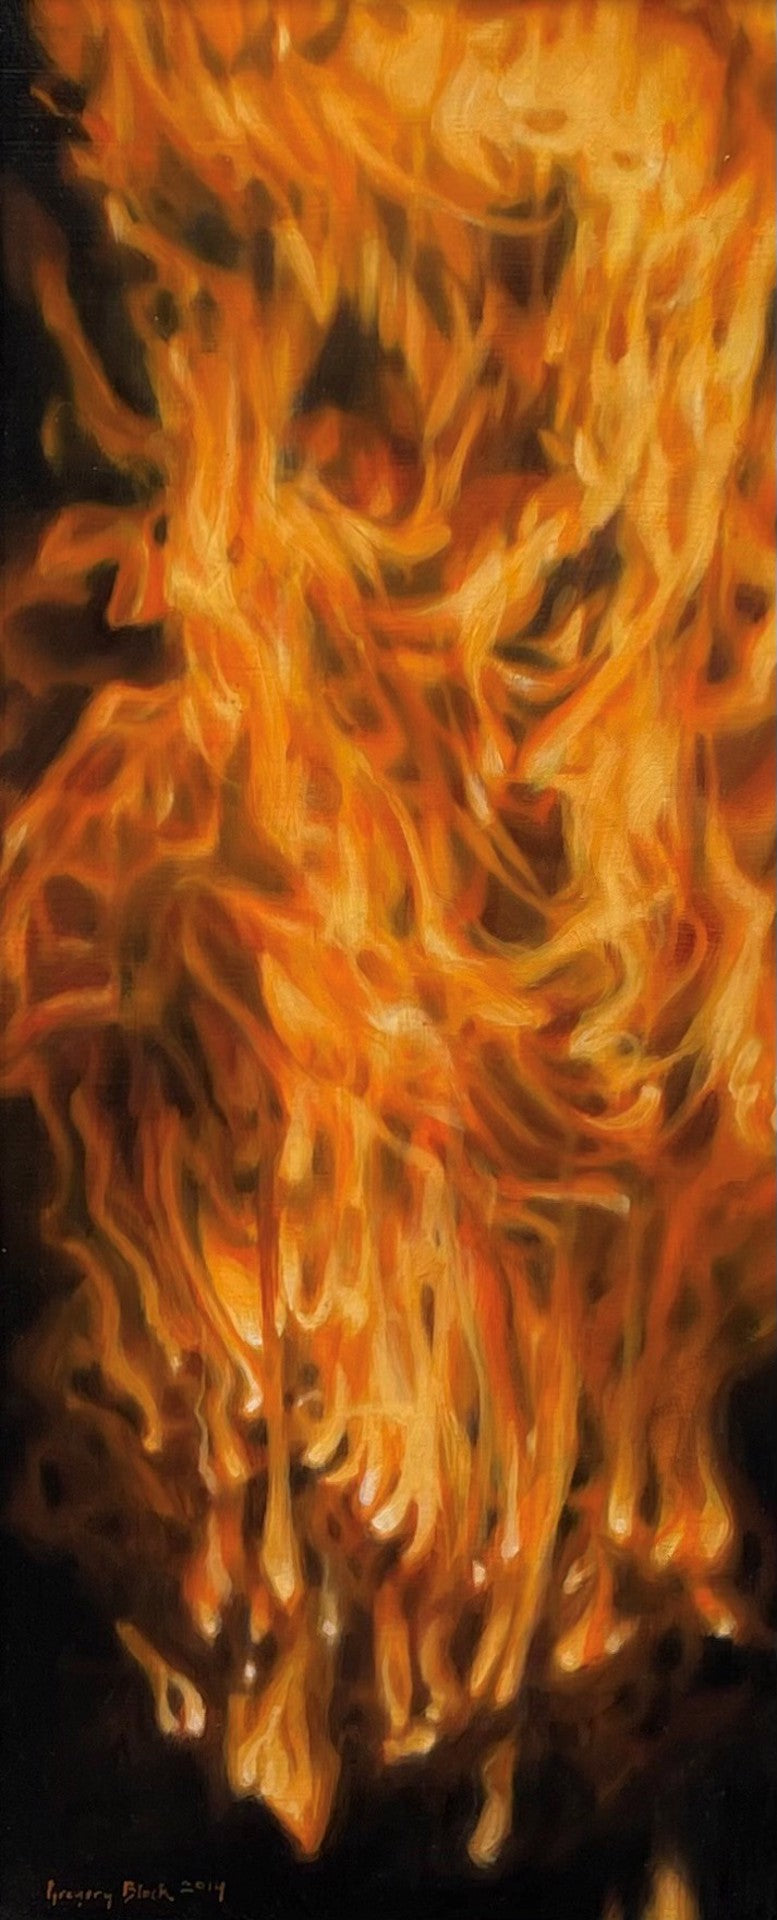 Oil painting of orange flames on a black background created by Gregory Block - "Bloom, 2014" from Gregory Block.